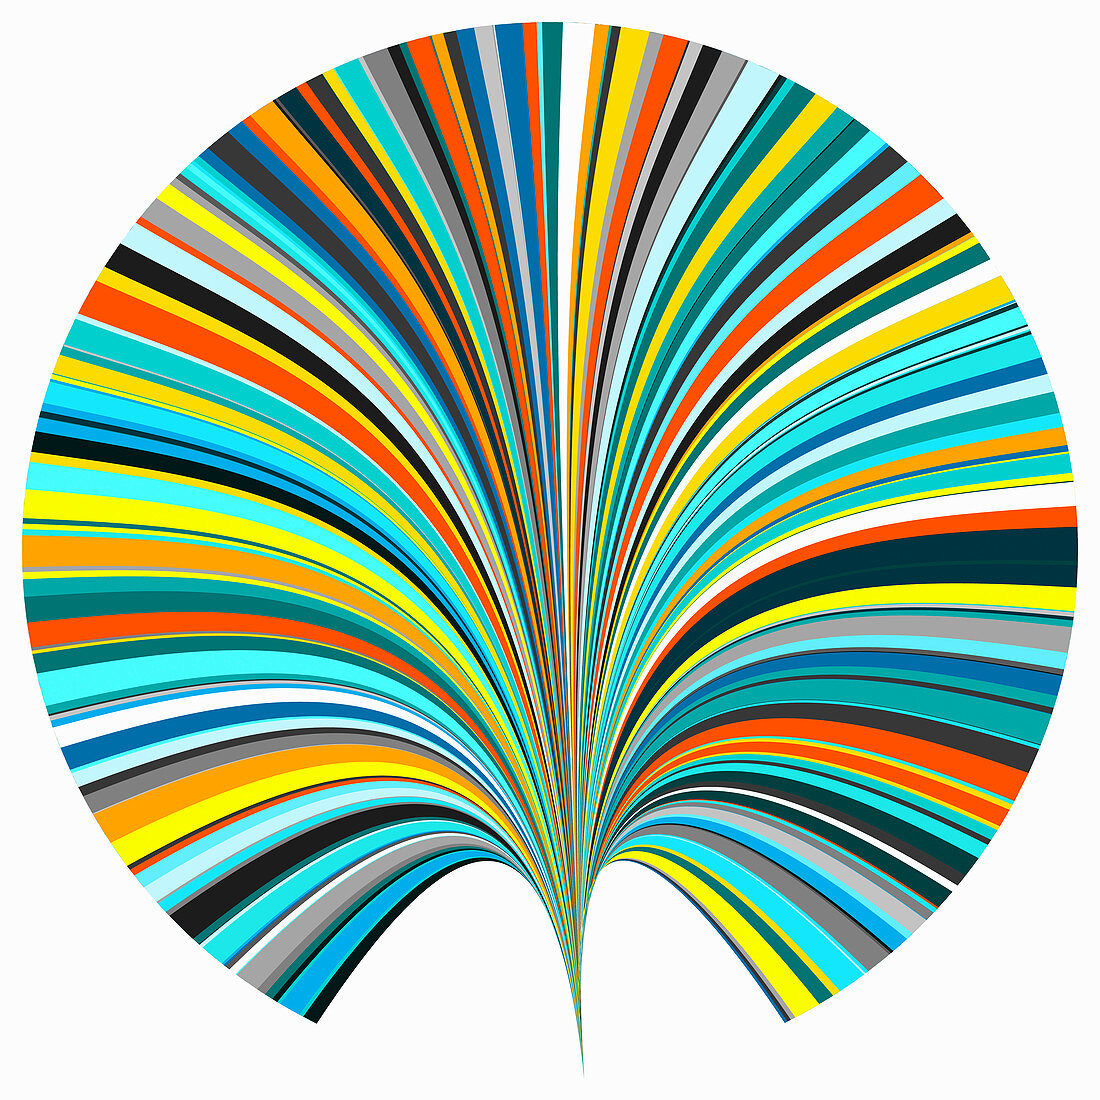 Abstract fan shape with rainbow colours, illustration